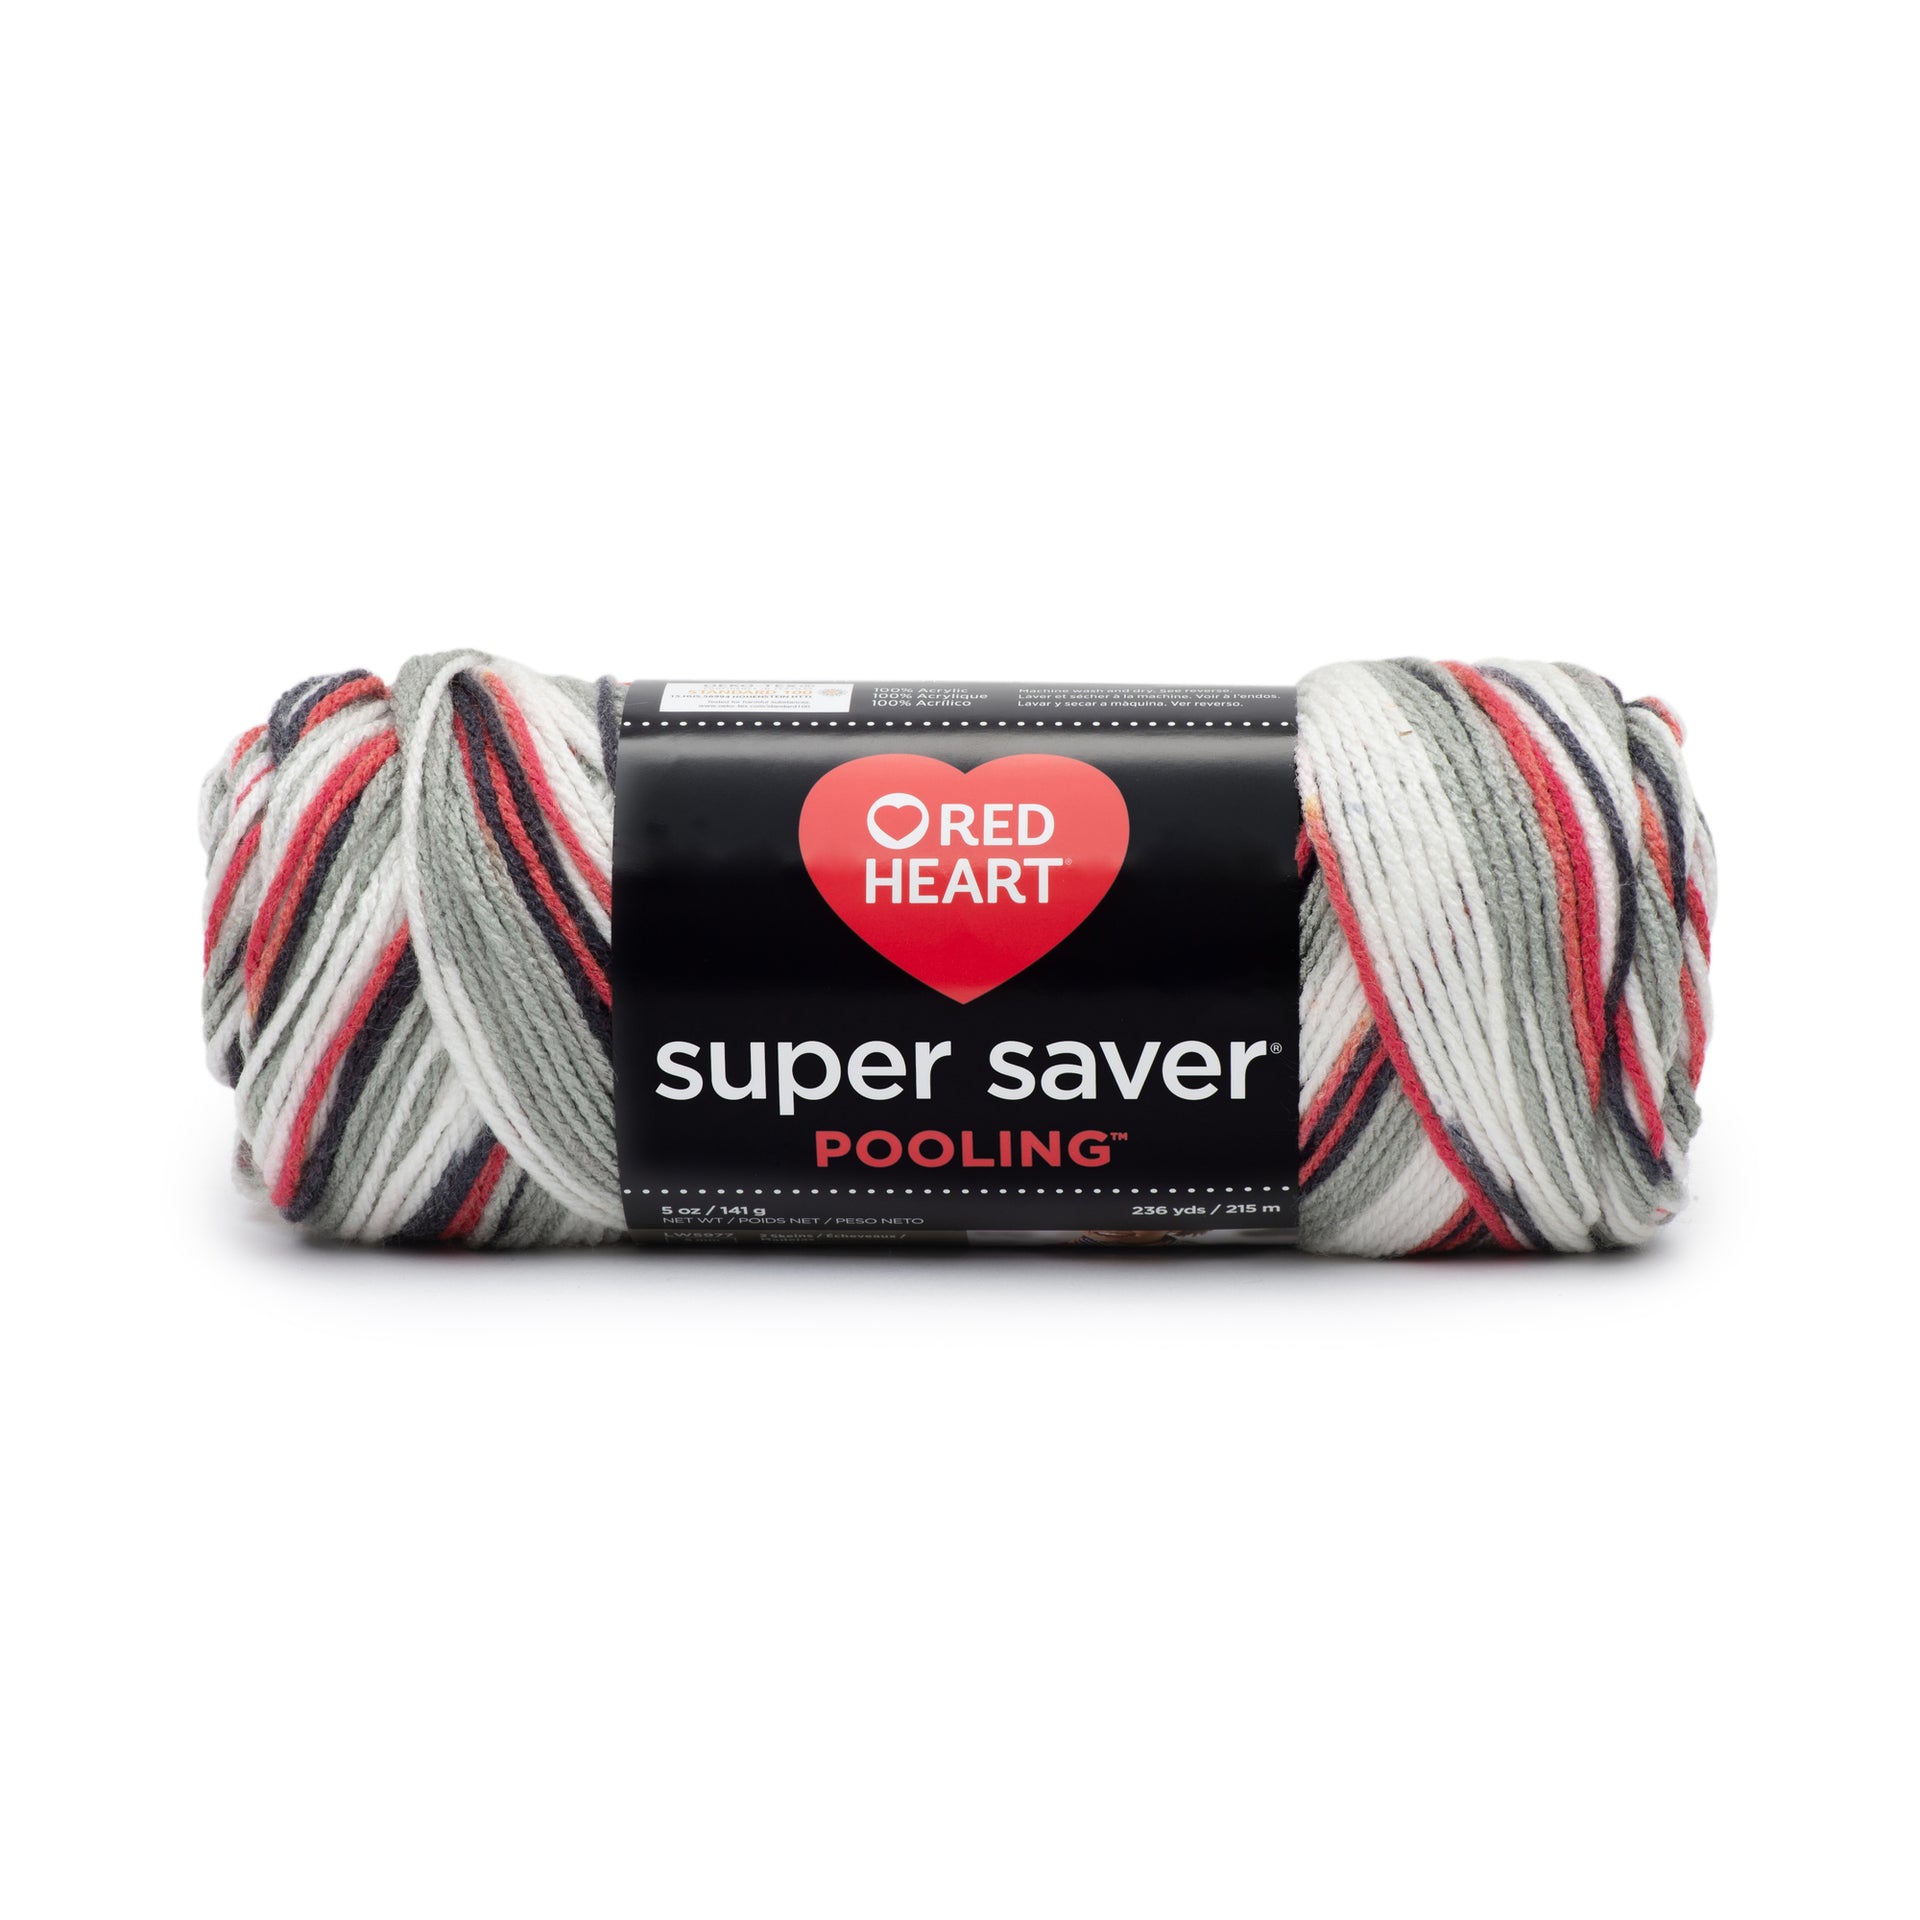 Red Heart Super Saver Pooling Yarn-Papaya, 1 count - Fry's Food Stores